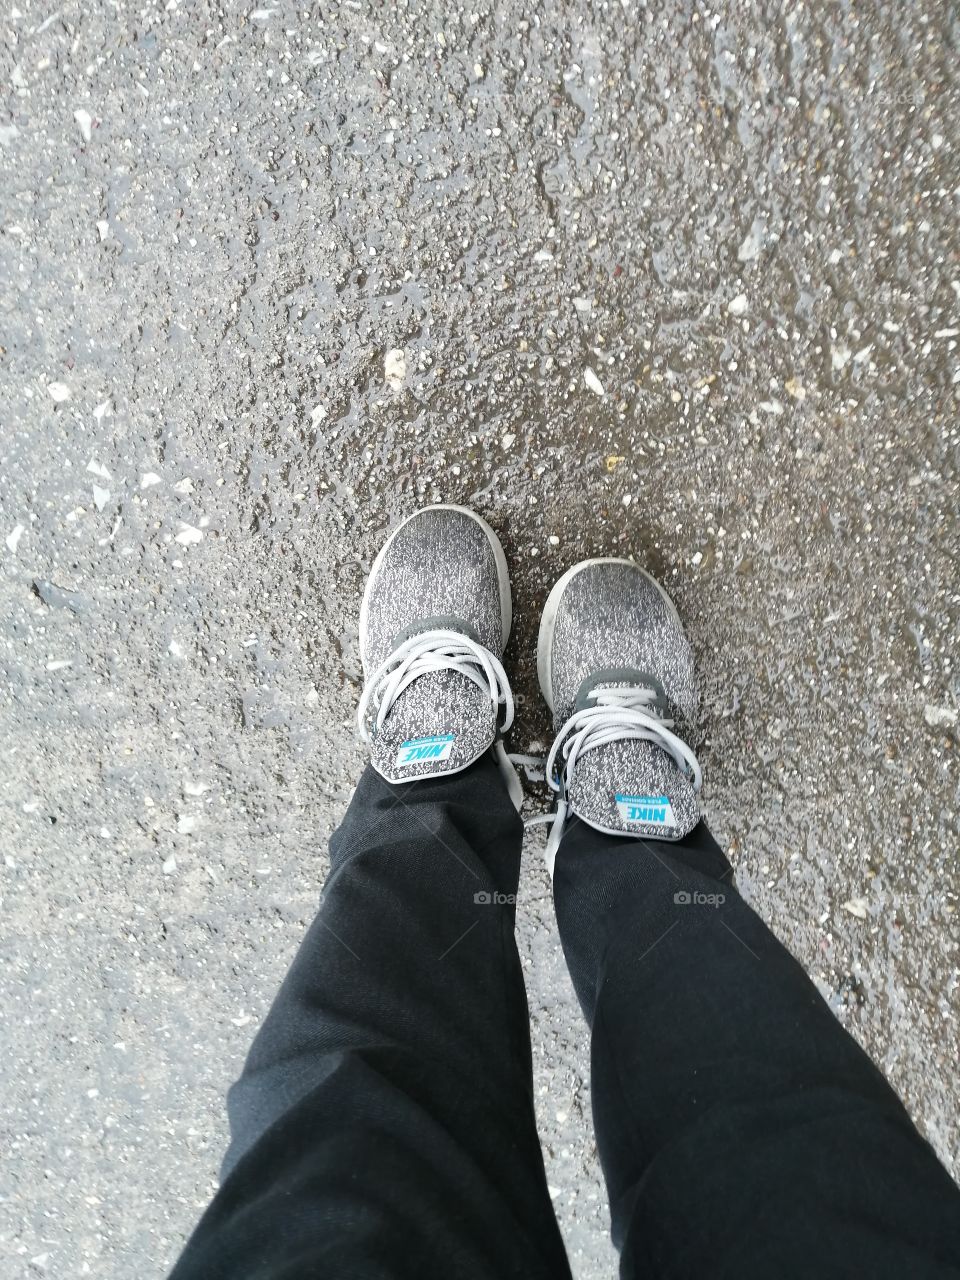 From​ A  to​ B​: Same shoes, same route goint to work every​ day for almost​ 4 years. Thank you to my Nike shoes​ for keeping me safe while​ walking​ for more success.